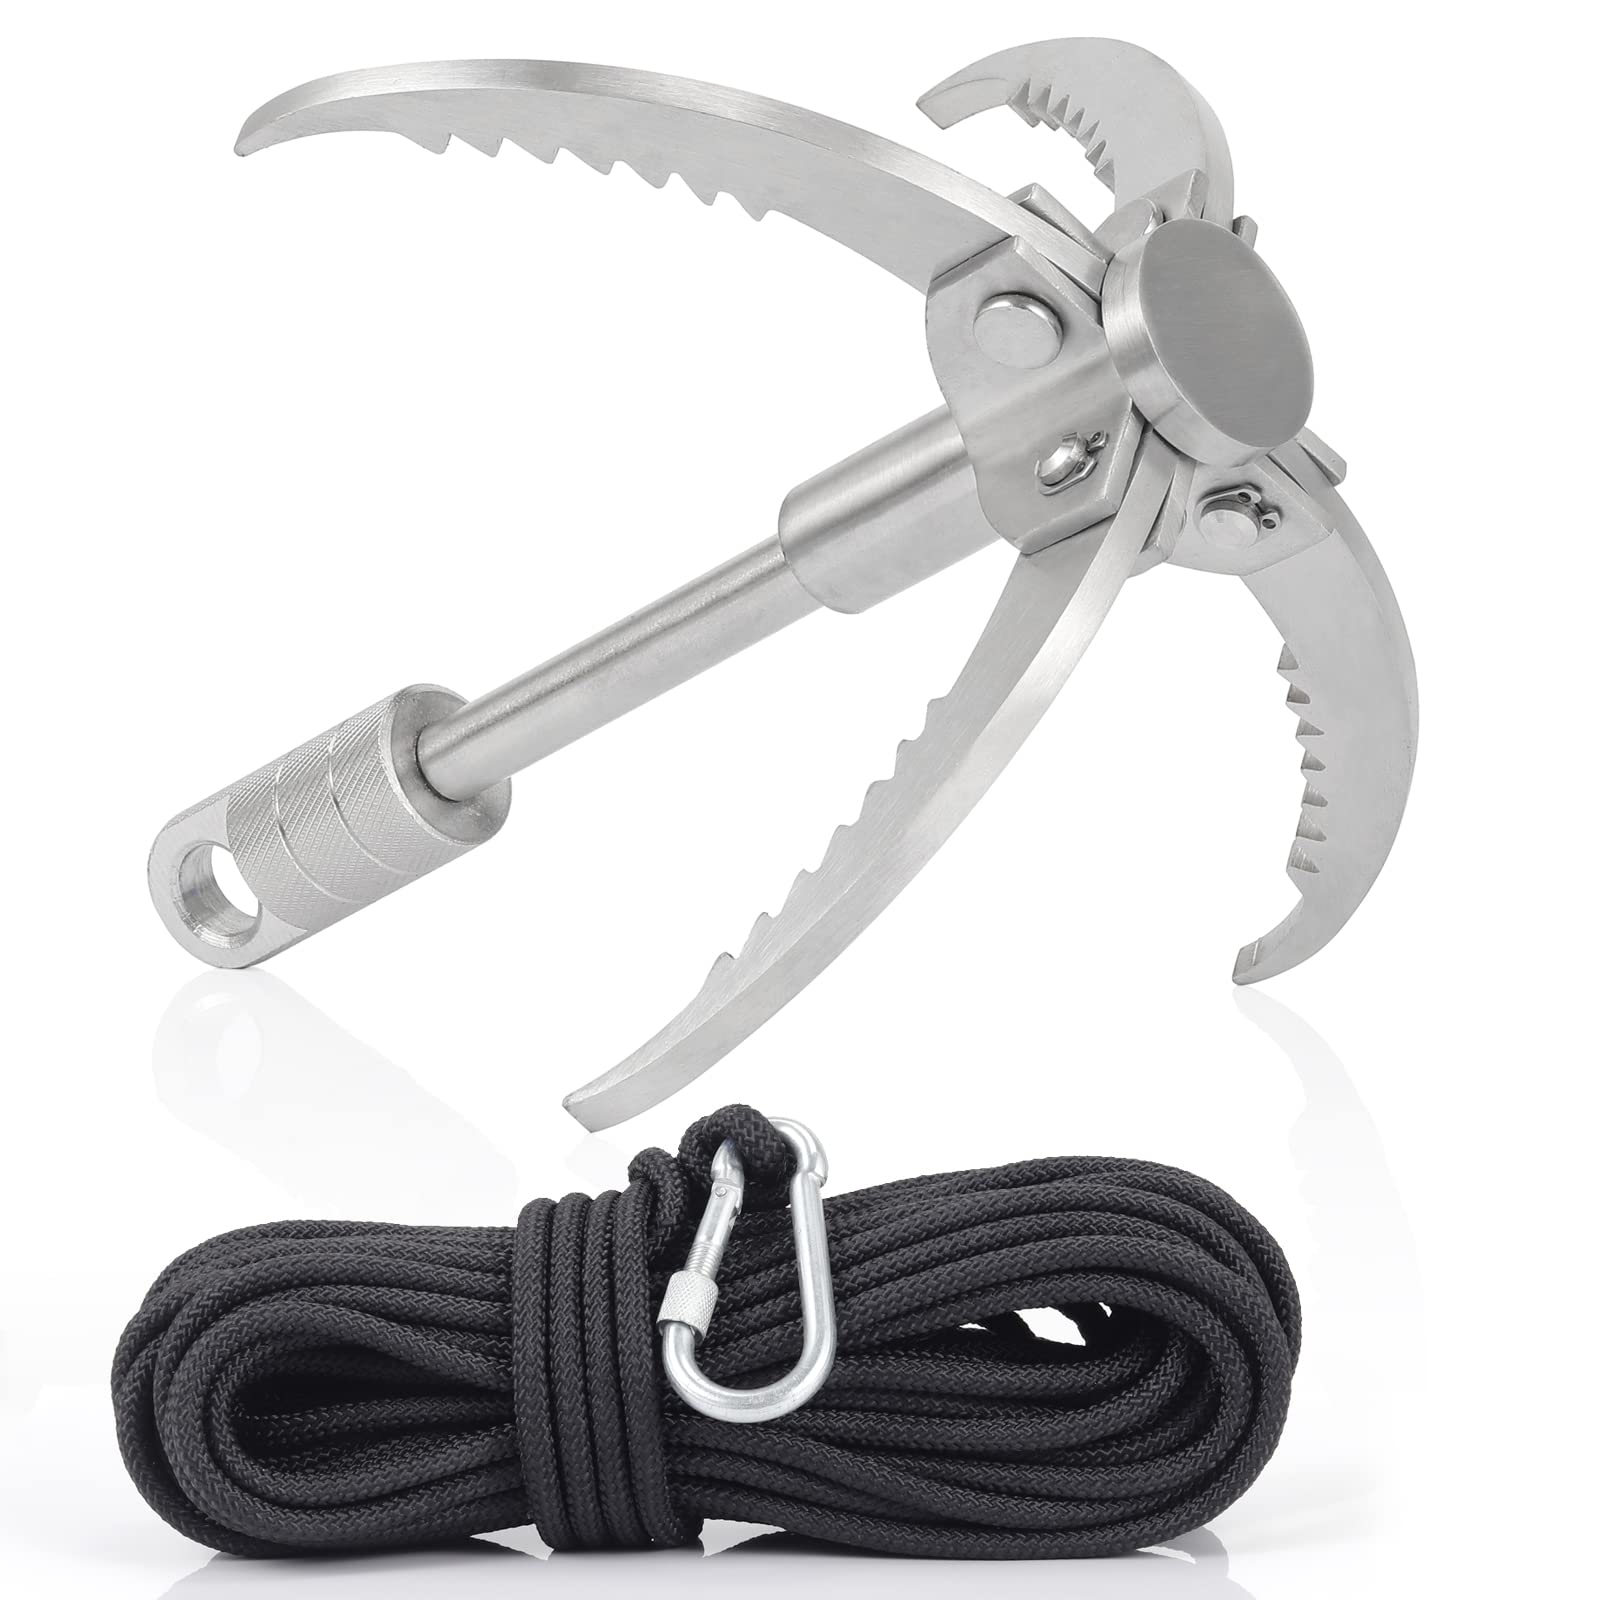 12 Heavy Duty Stainless Steel 316 Grappling Hook with 4-Claw Stainless  Steel Climbing Hooks for Anchor Retrieving, Outdoor Hiking, Tree Limb